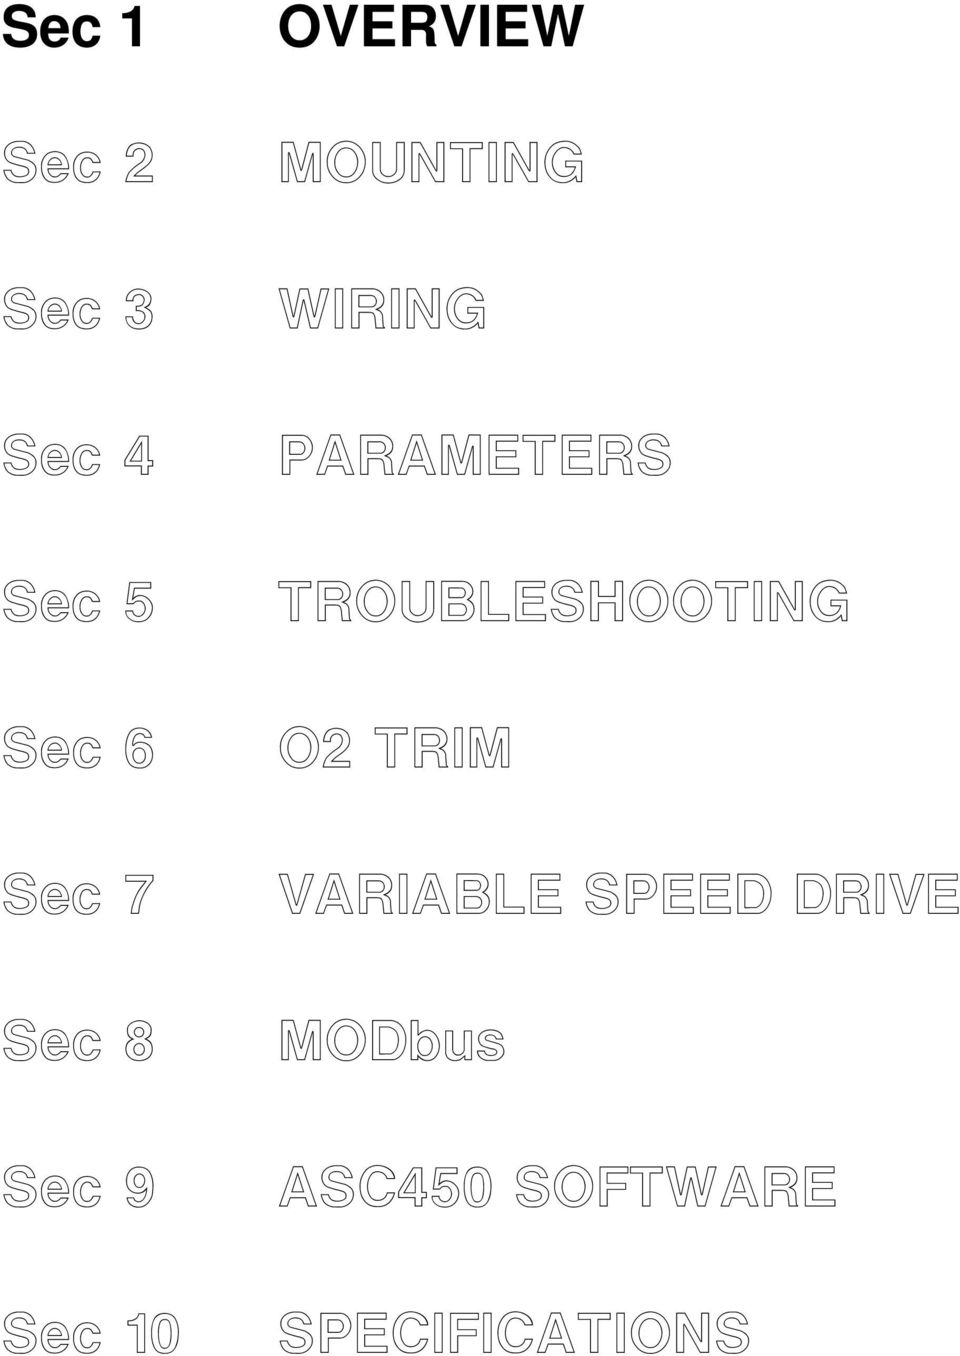 PARAMETERS TROUBLESHOOTING O2 TRIM VARIABLE